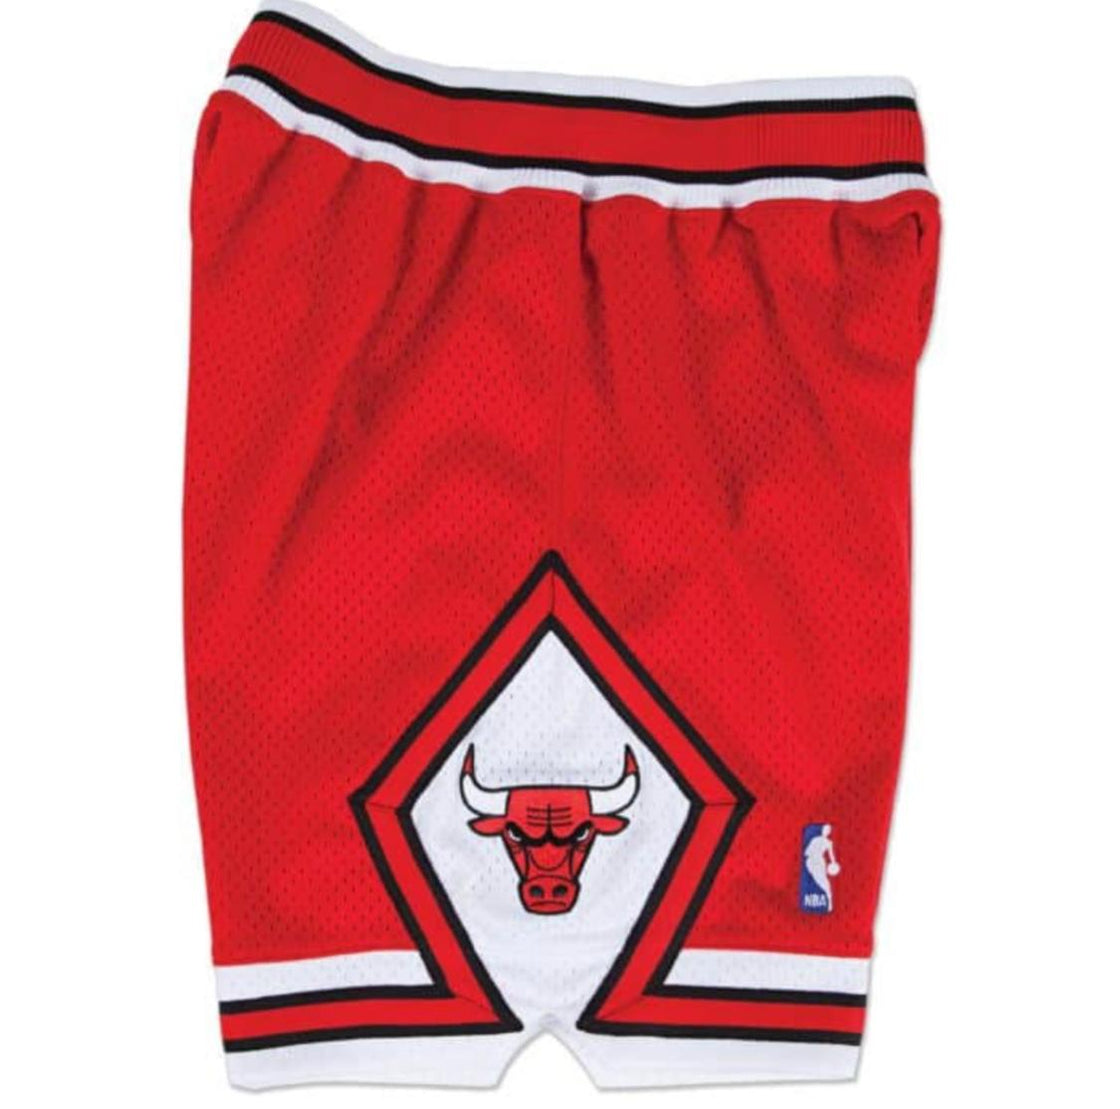 MITCHELL & NESS MEN'S CHICAGO BULLS RED AUTHENTIC SHORTS 1997-1998